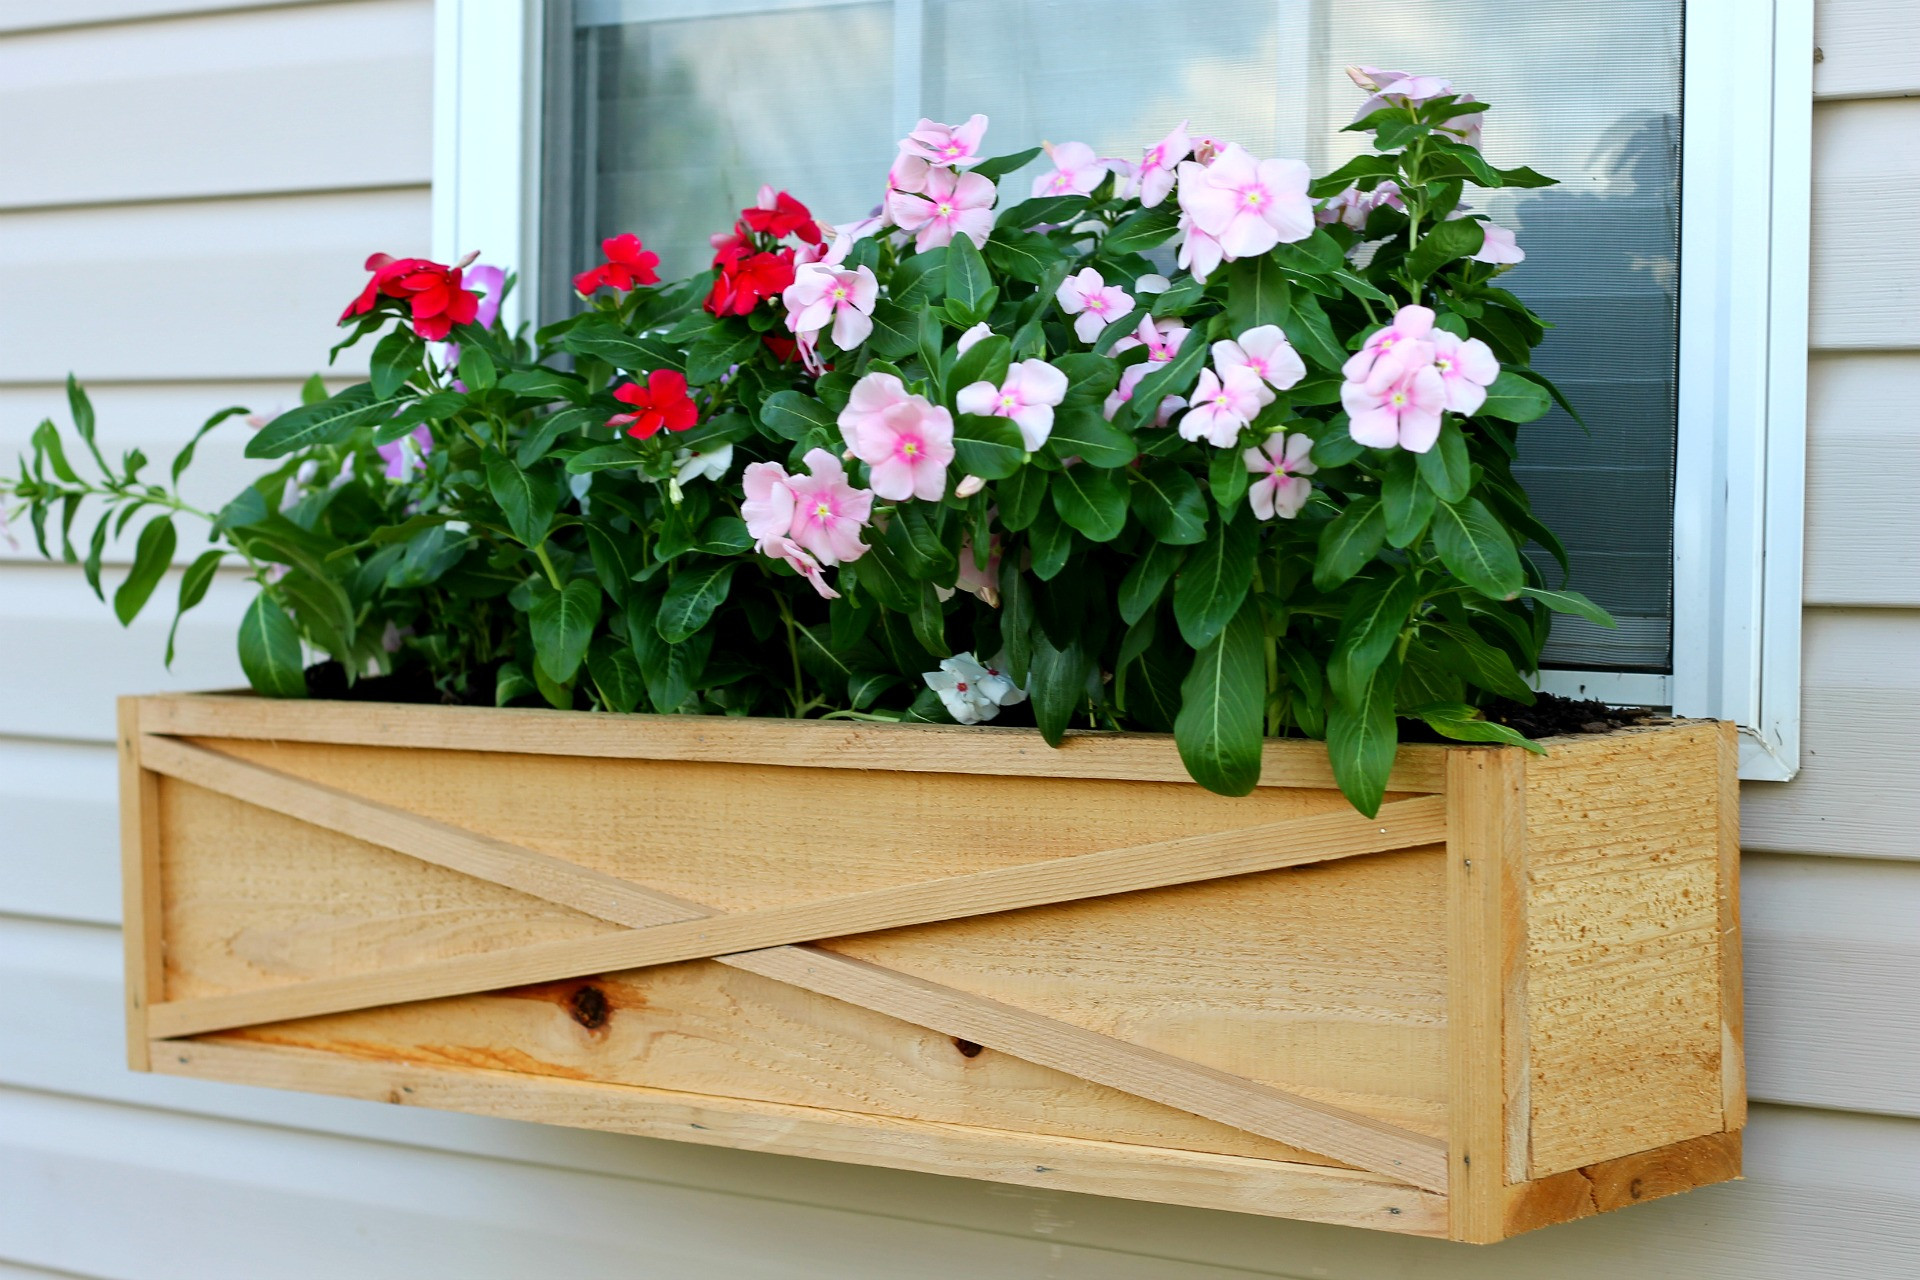 DIY Window Box
 23 DIY Window Box Ideas Build And Fill Them With Colorful